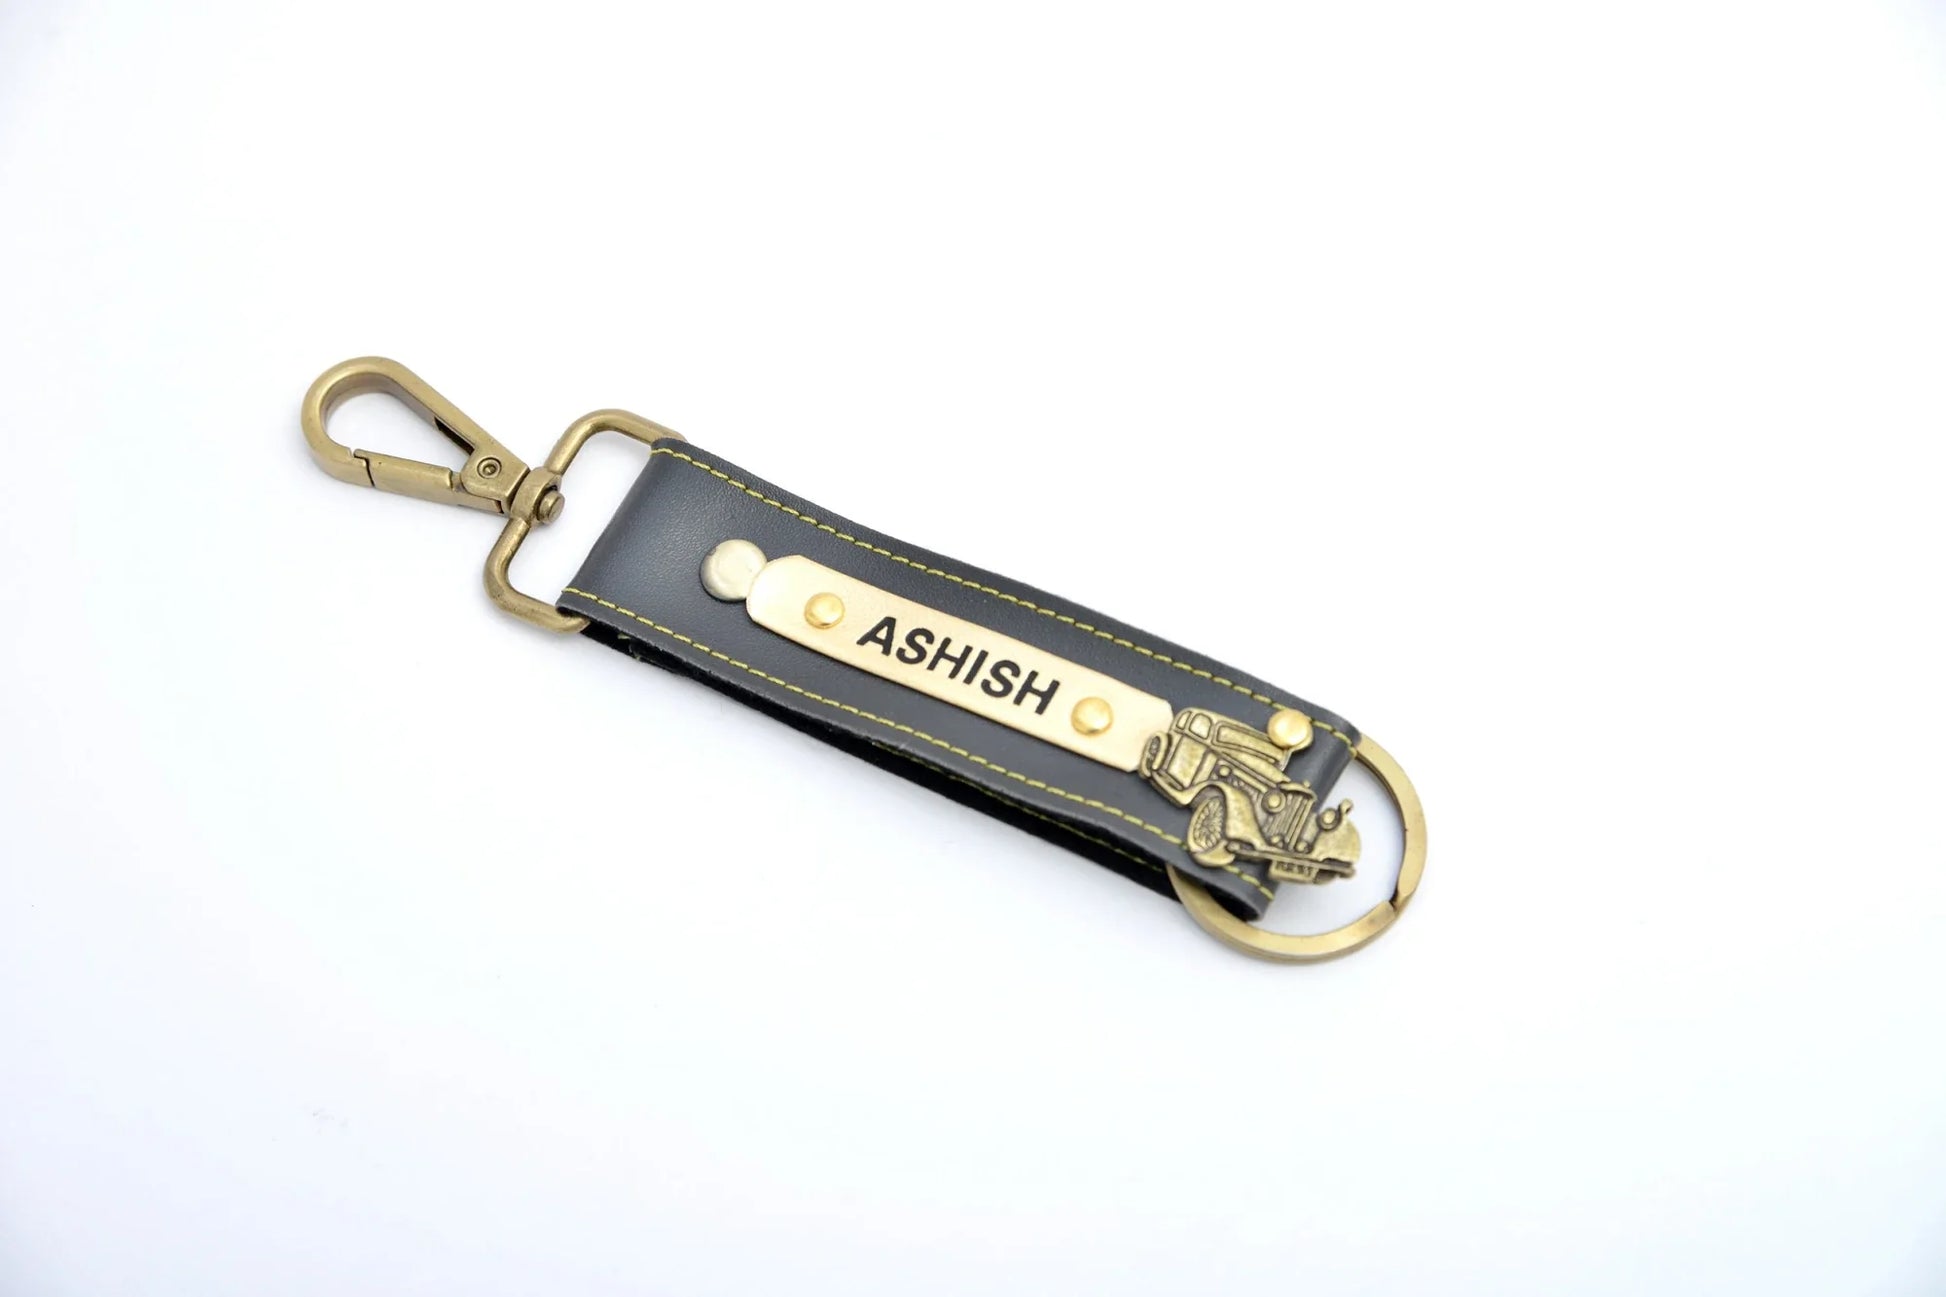 This keychain will not only be useful to anyone who you gift it to but will also help you leave your mark in thier lives. Material - Vegan Leather